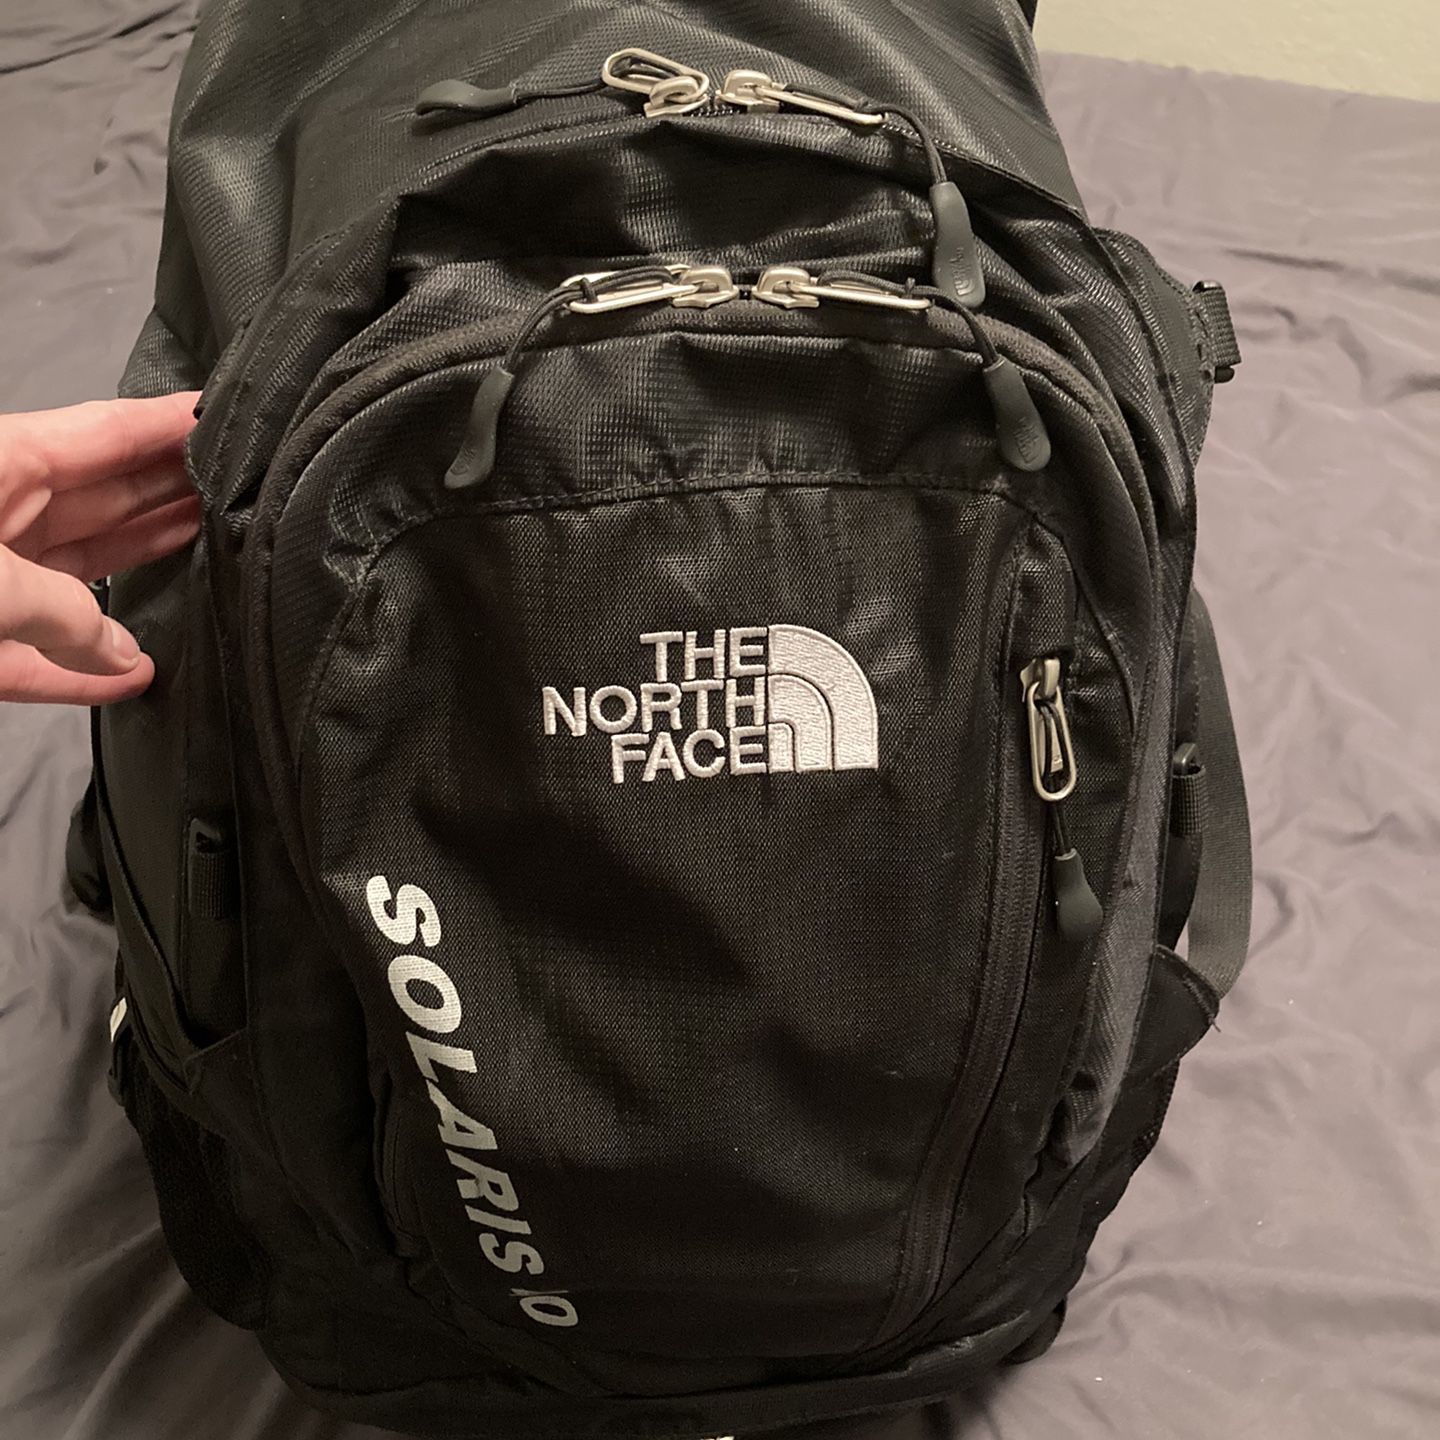 The North Face Solaris 40 Backpack